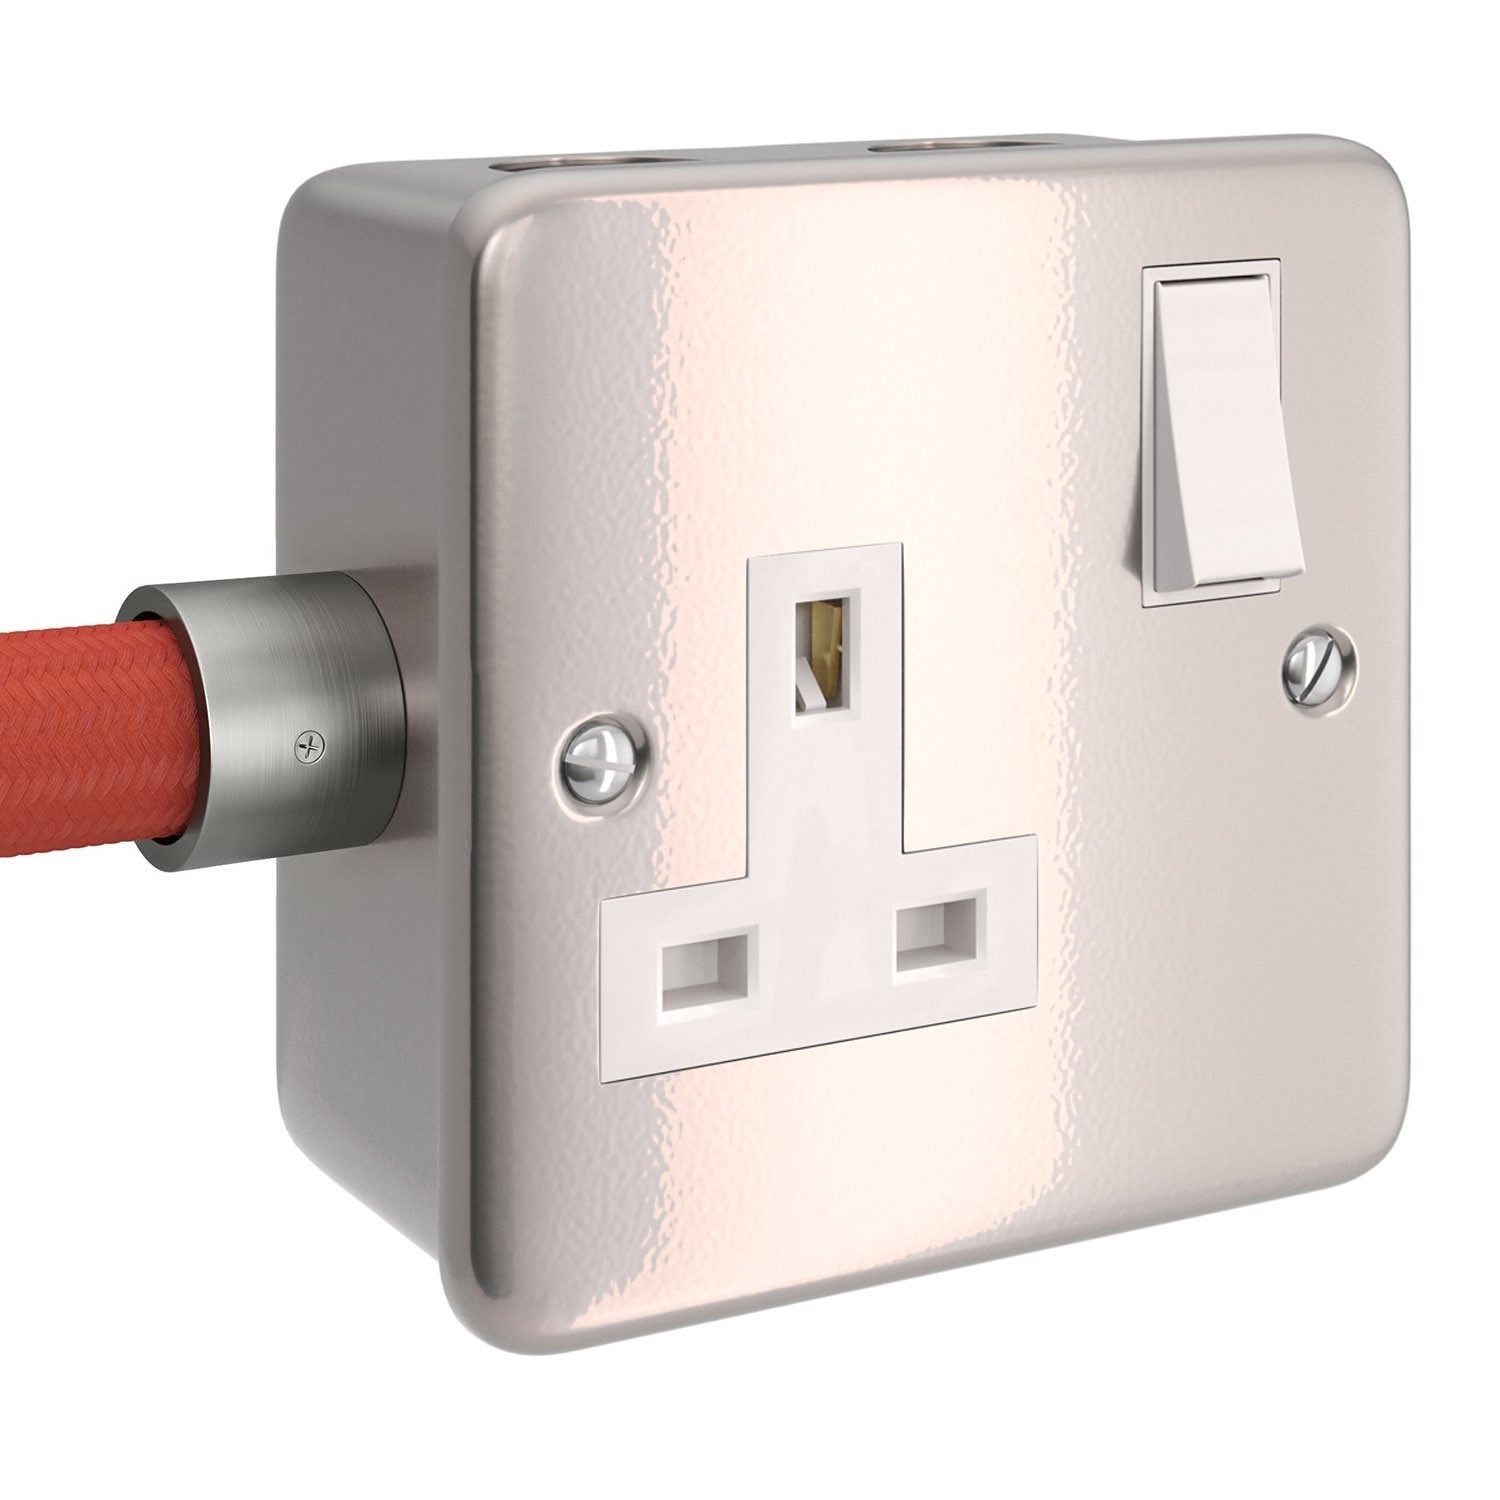 Metal clad box with UK socket and single switch for Creative-Tube